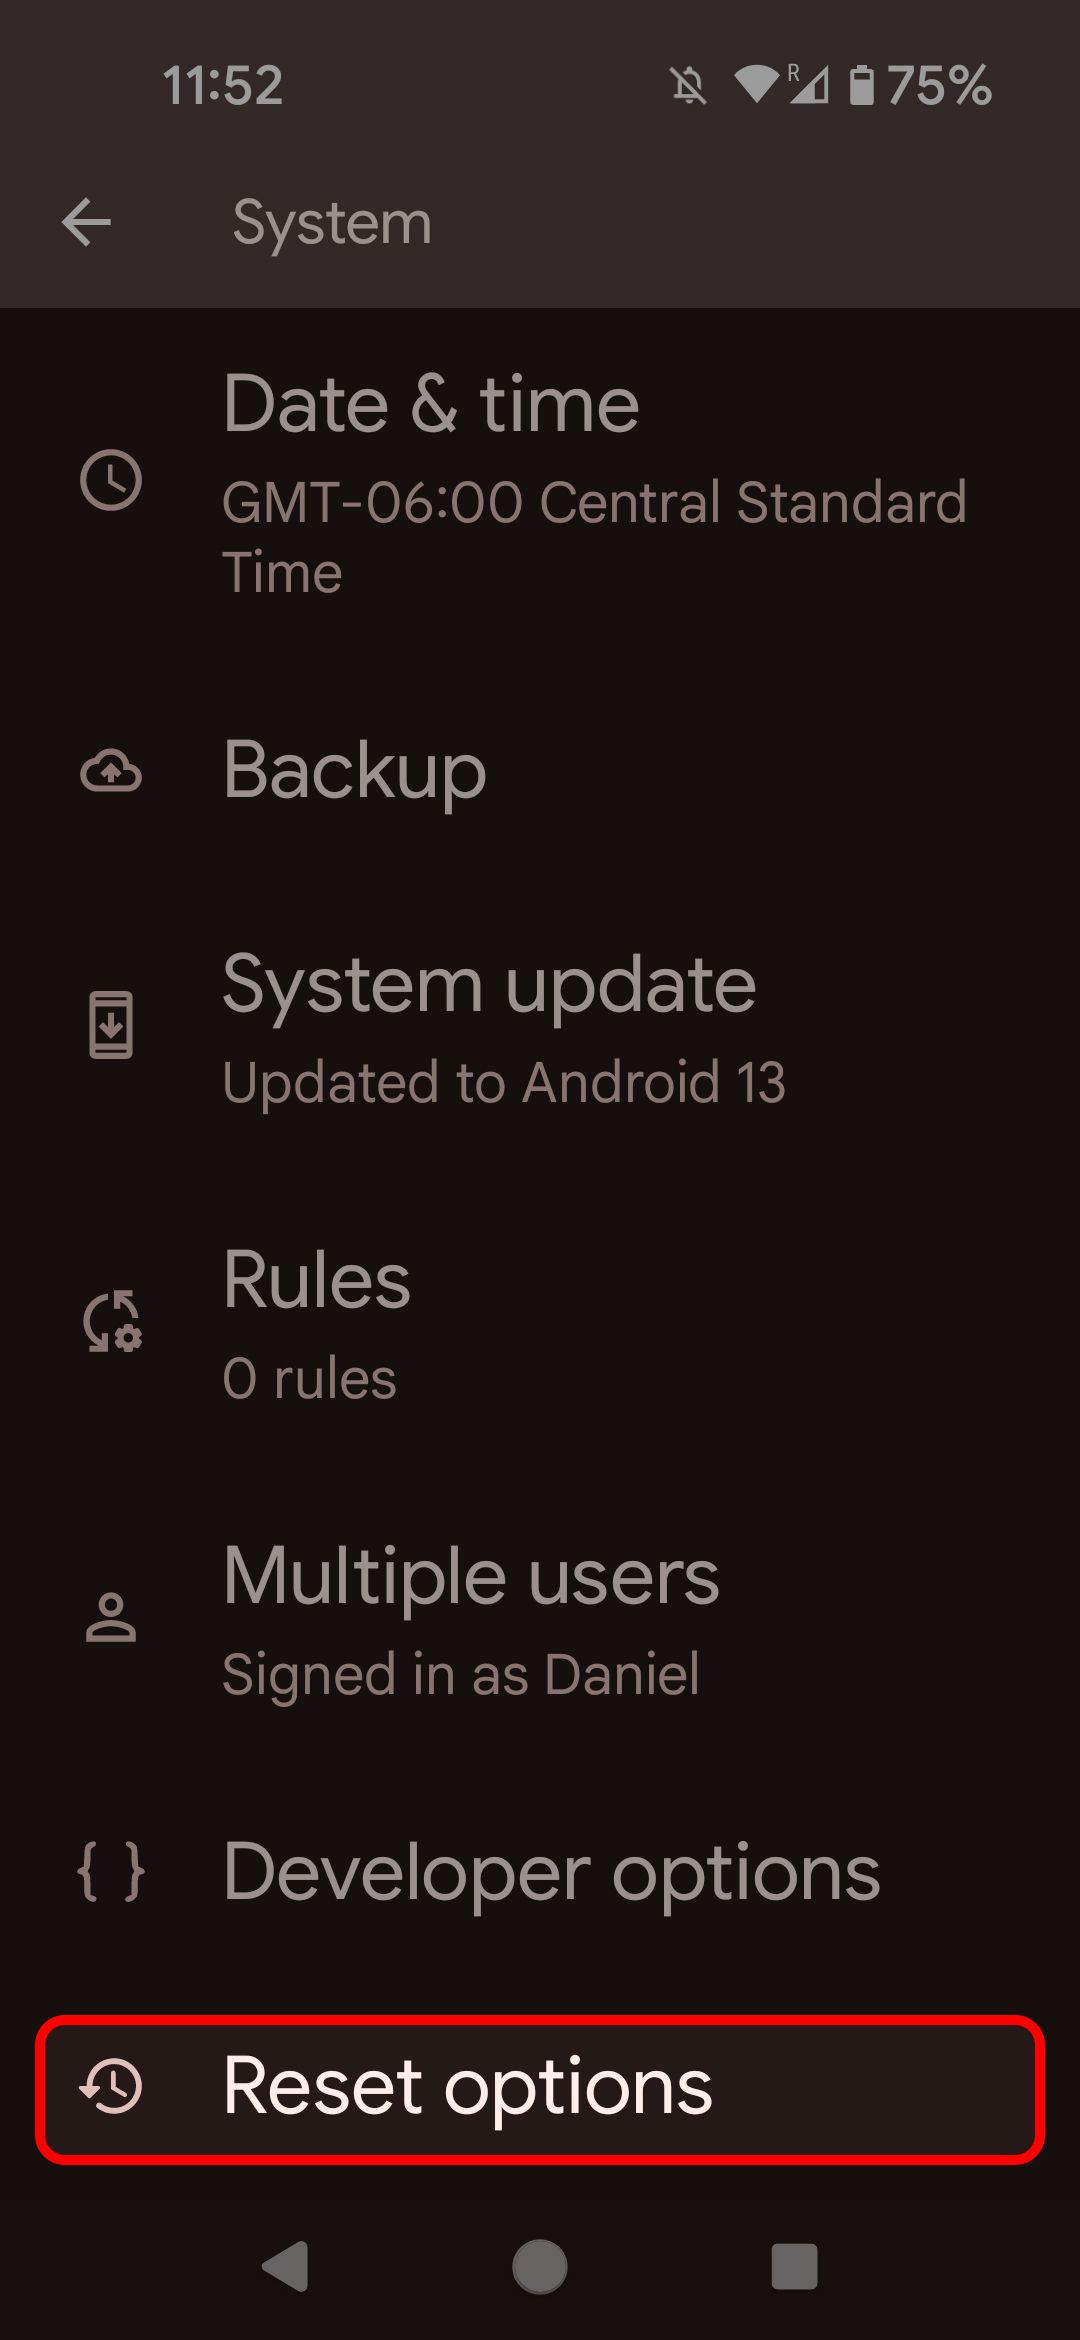 Android system menu highlighting the selection of reboot options